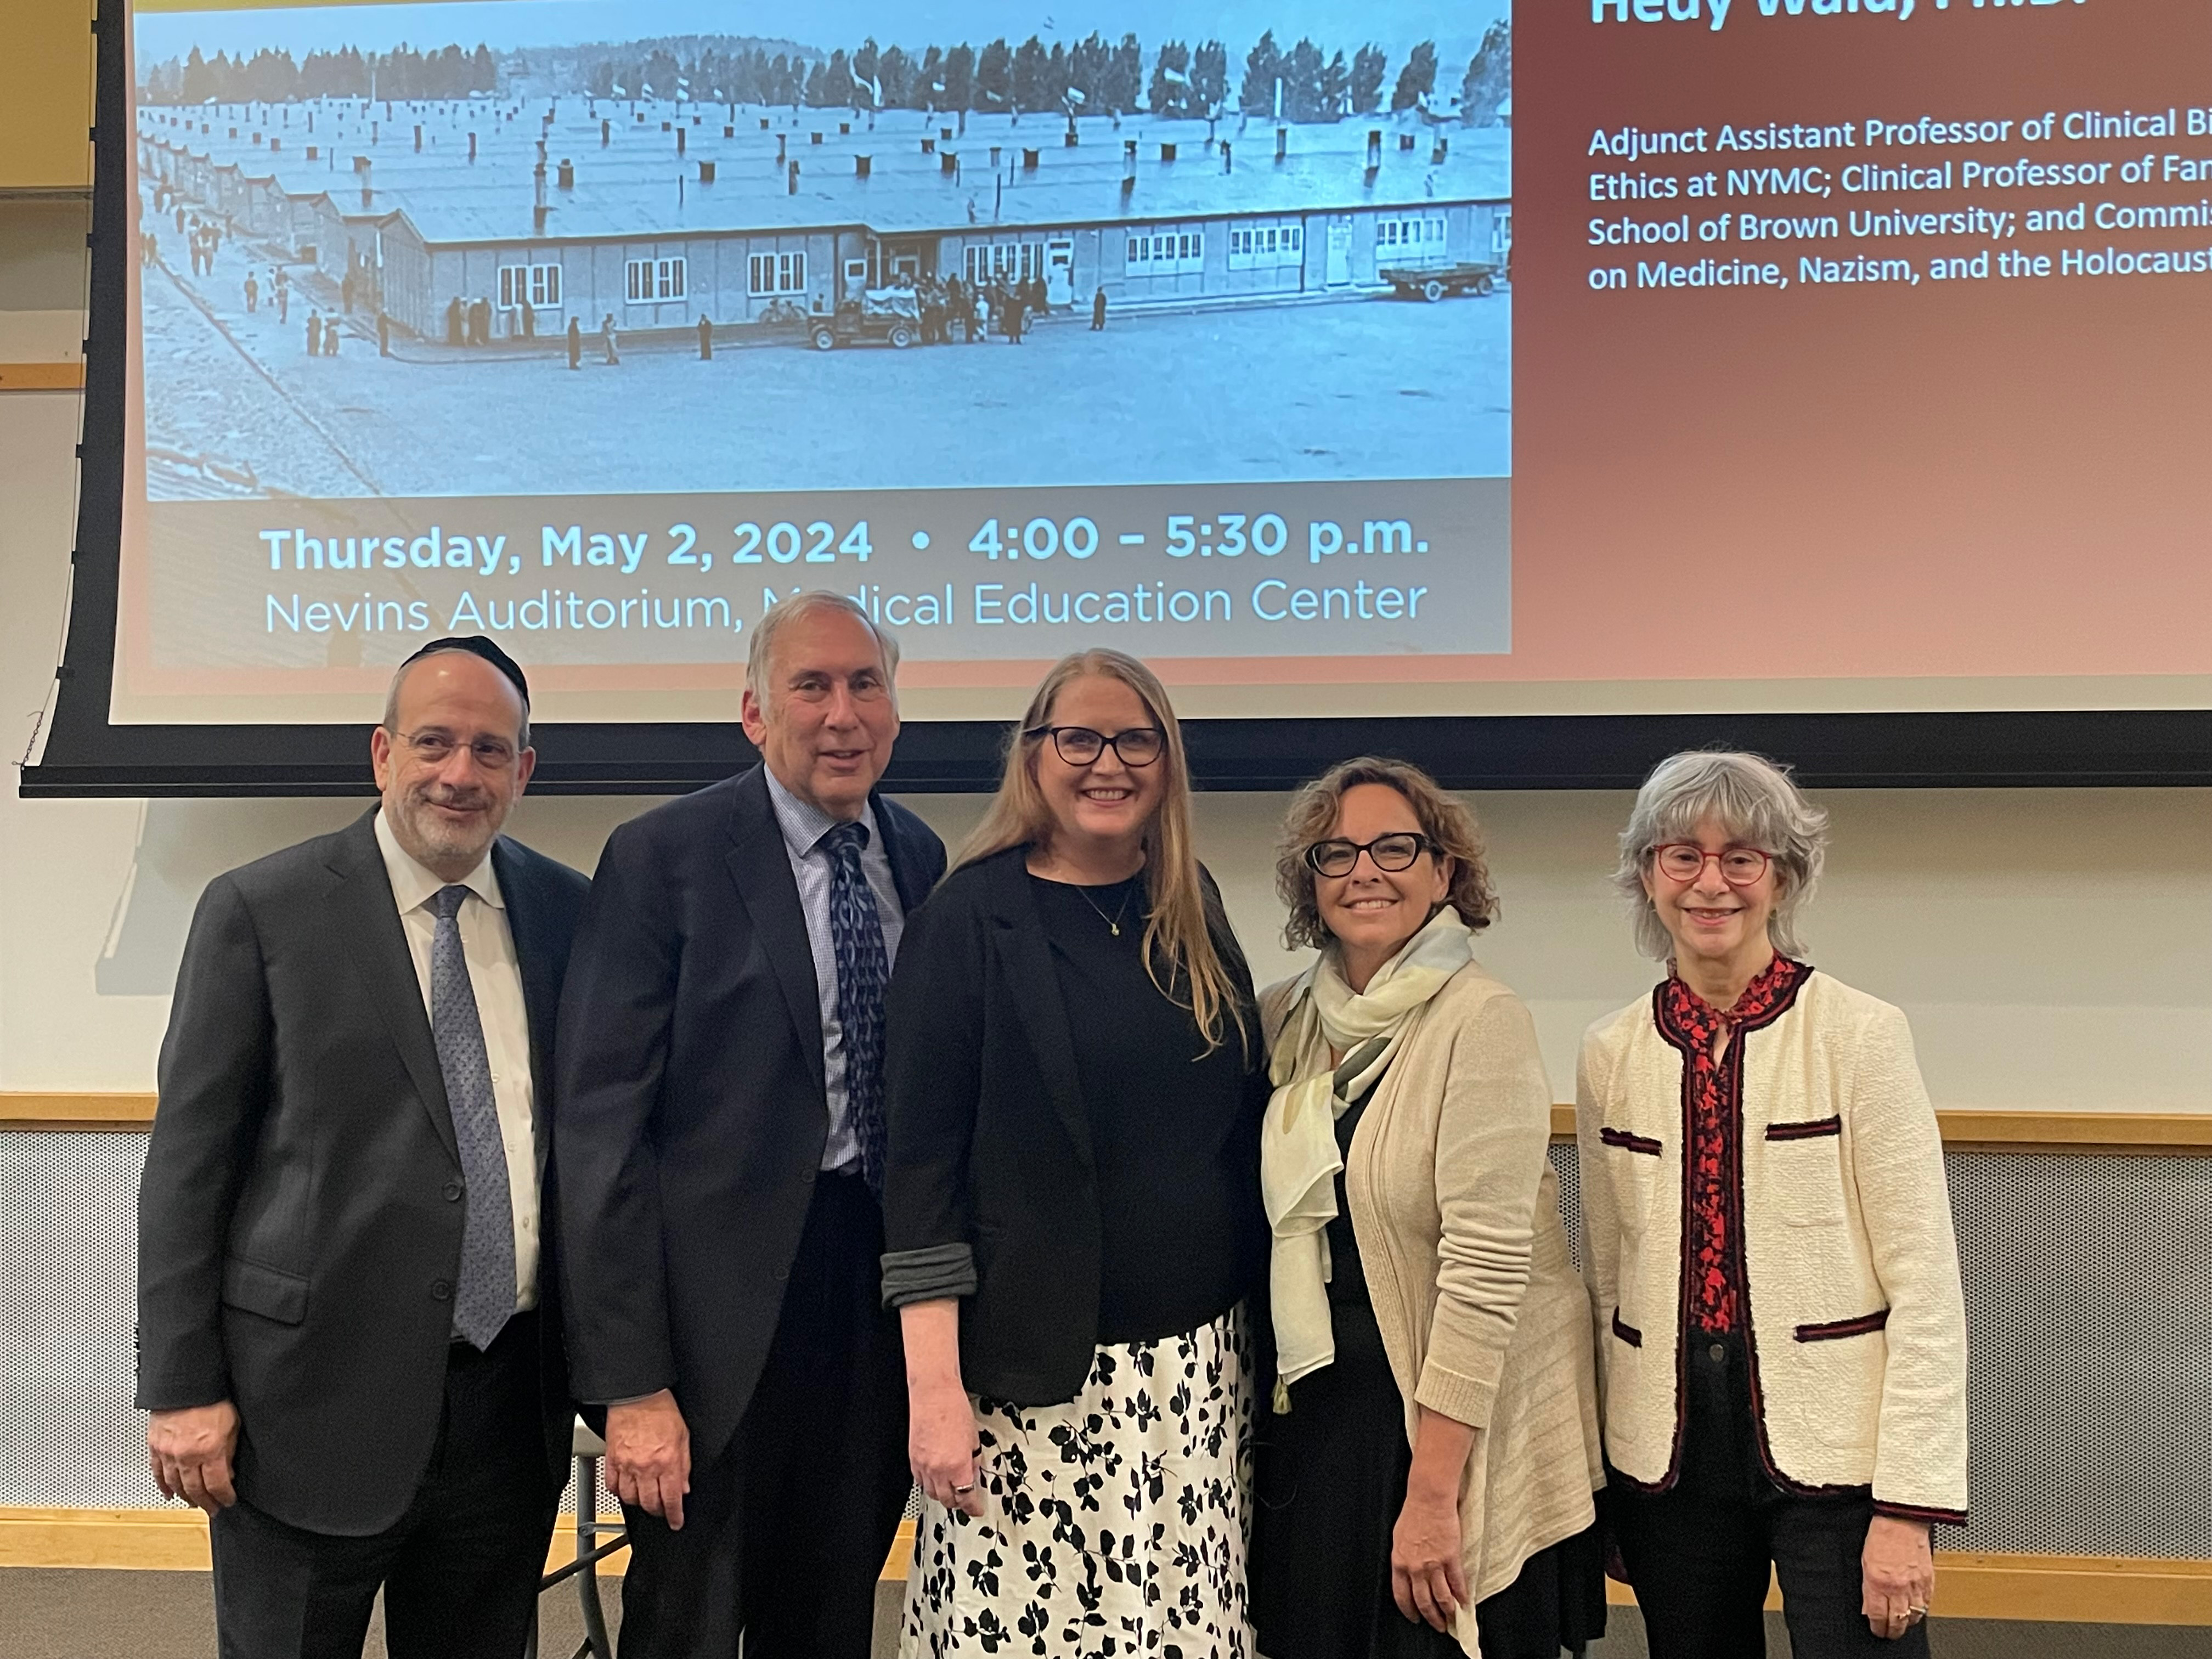 NYMC and TU leadership and faculty with the keynote speaker of the 2024 Yom Hashoah event.